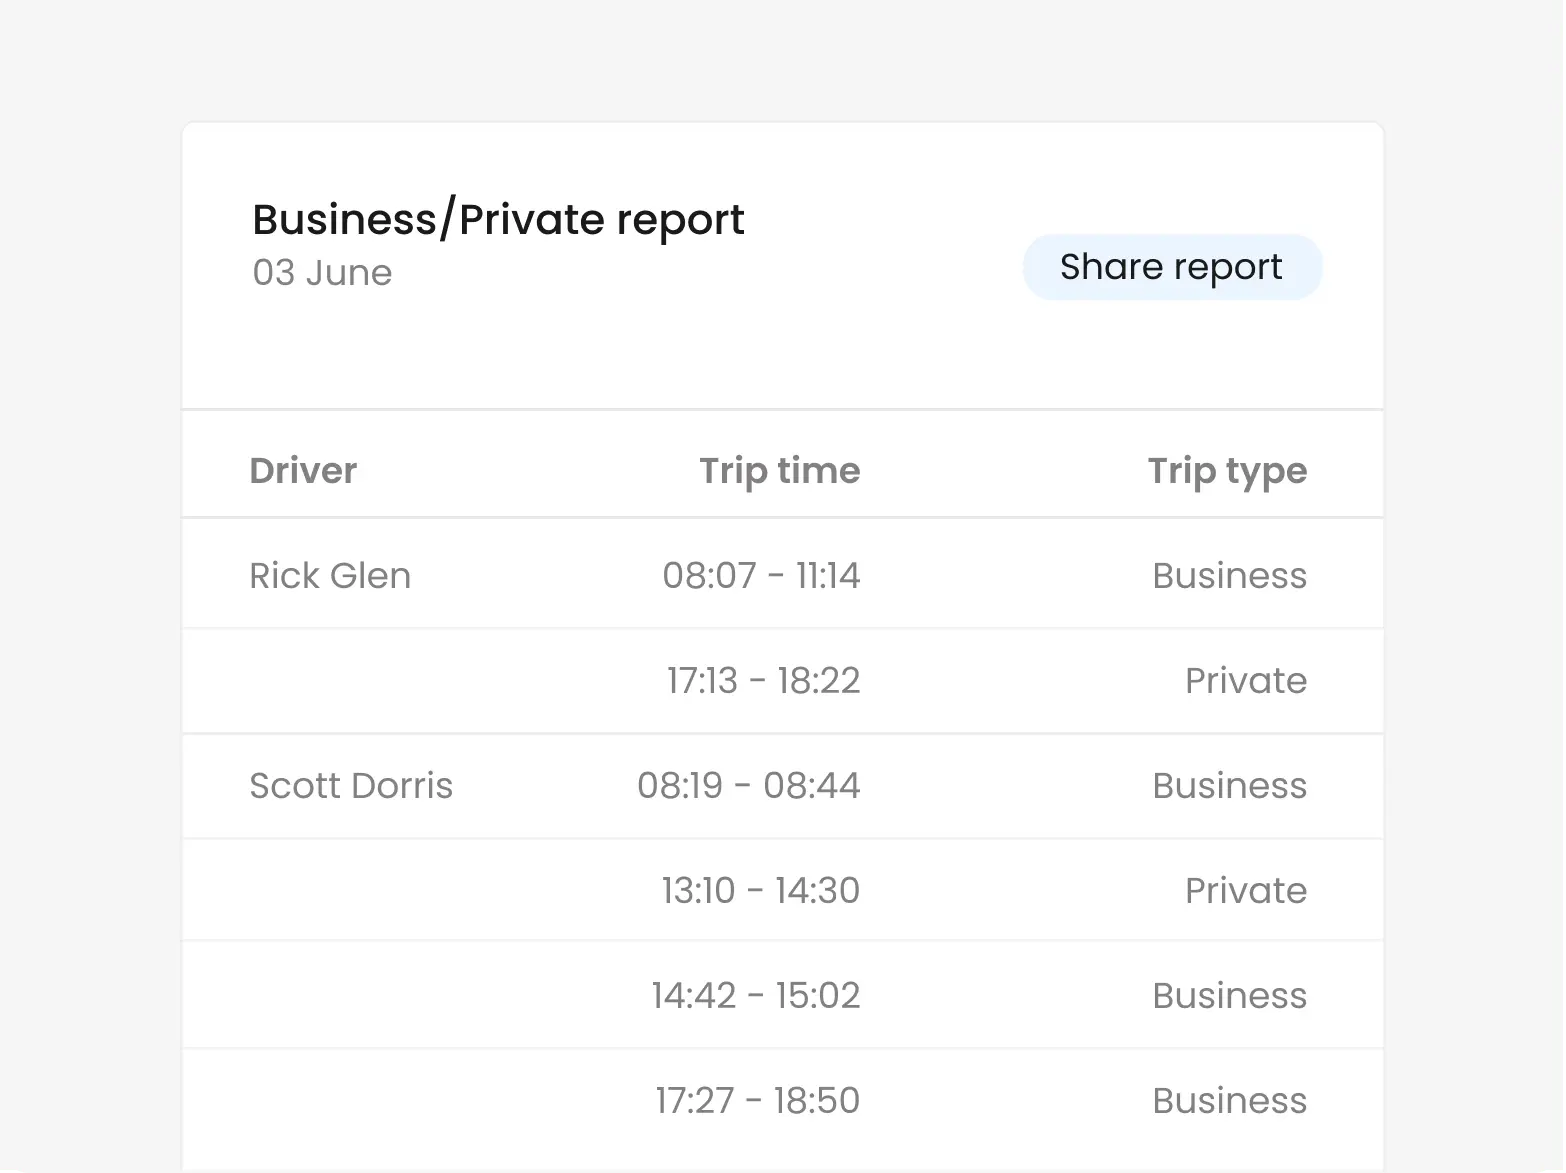 A report showing off different trips which are marked business or private.